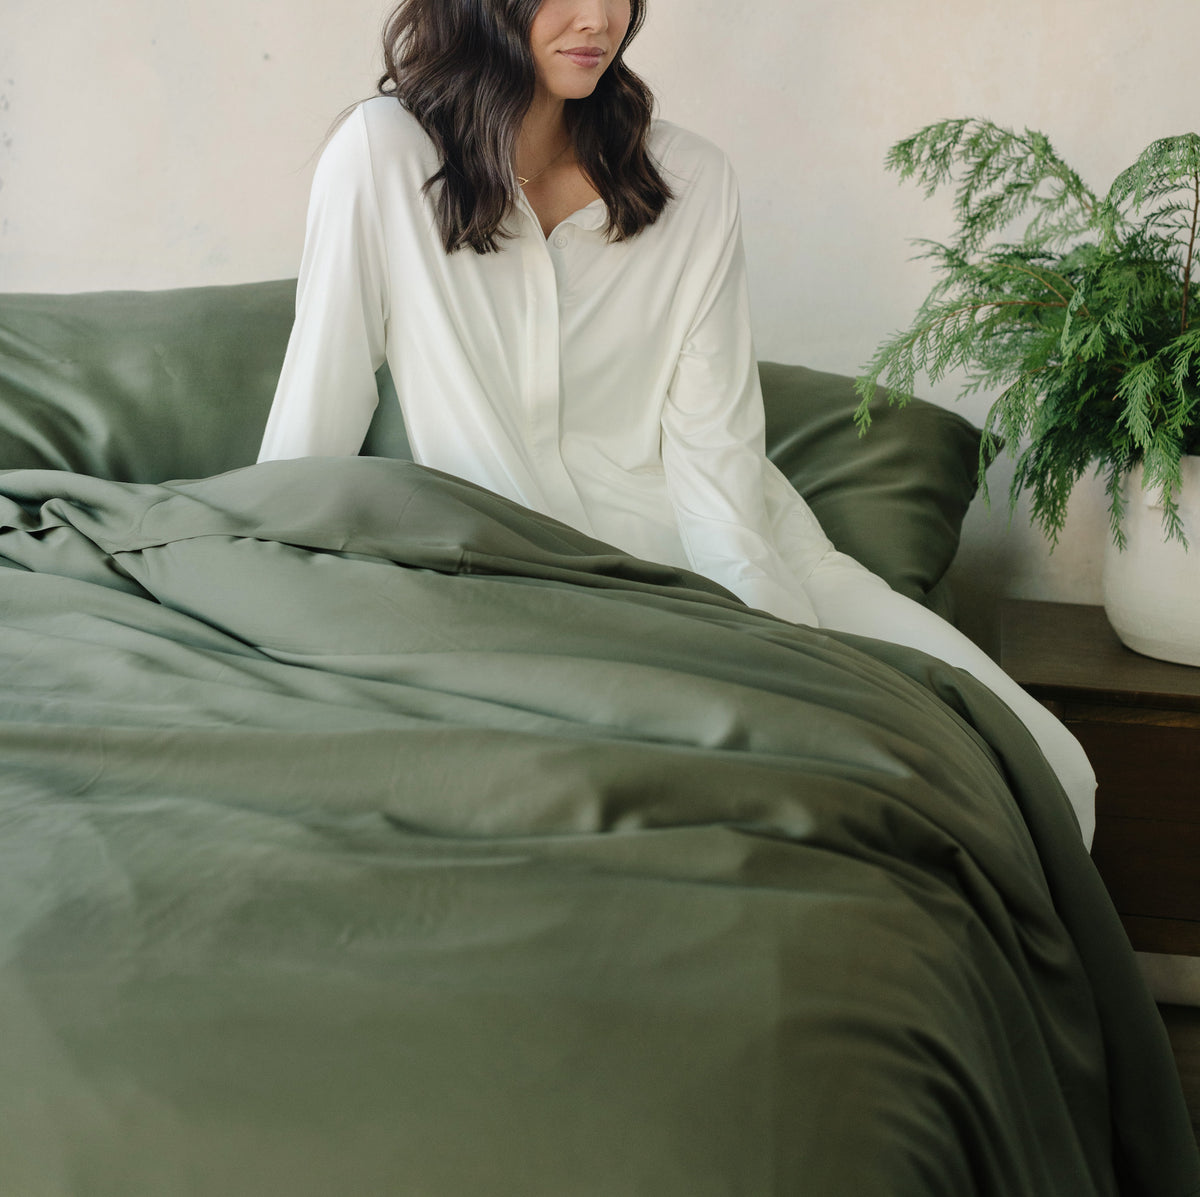 Woman in white pajamas sitting on bed with olive bedding |Color:Olive